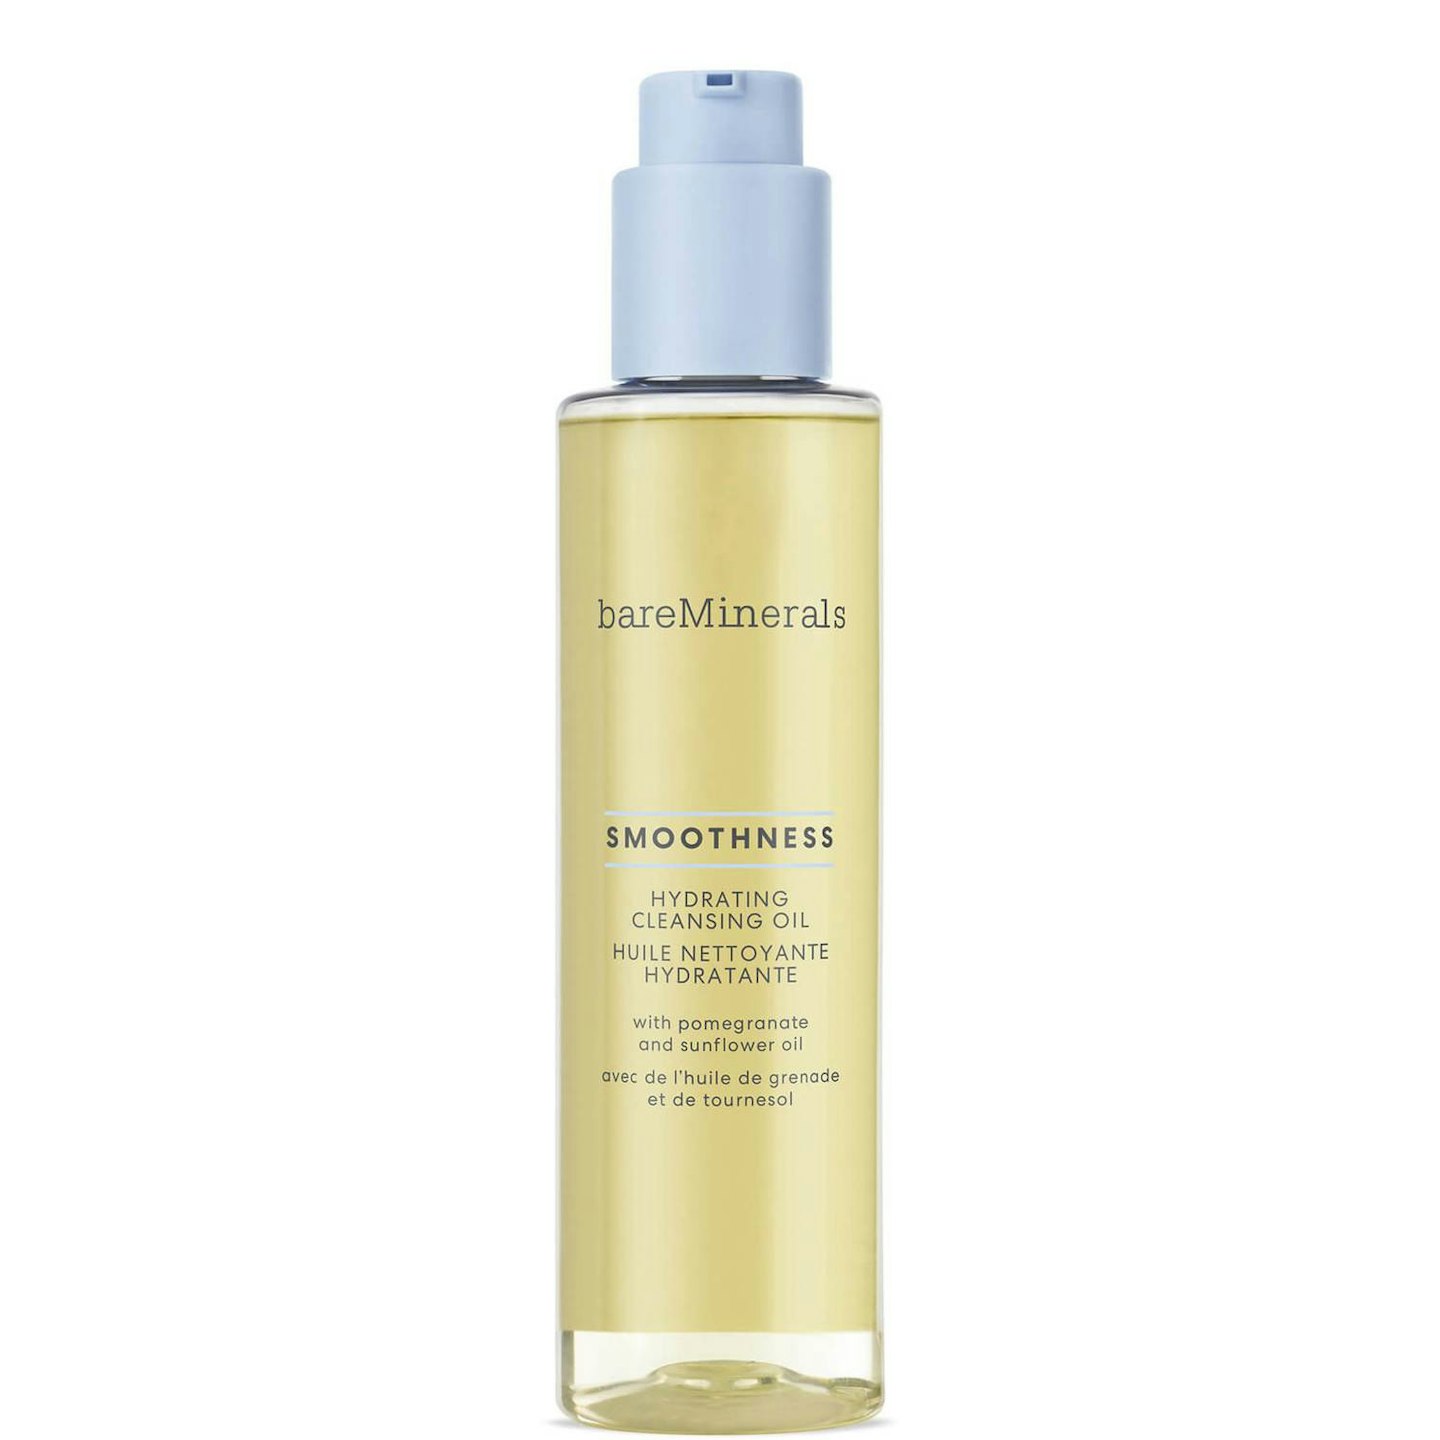 bareminerals cleansing oil 